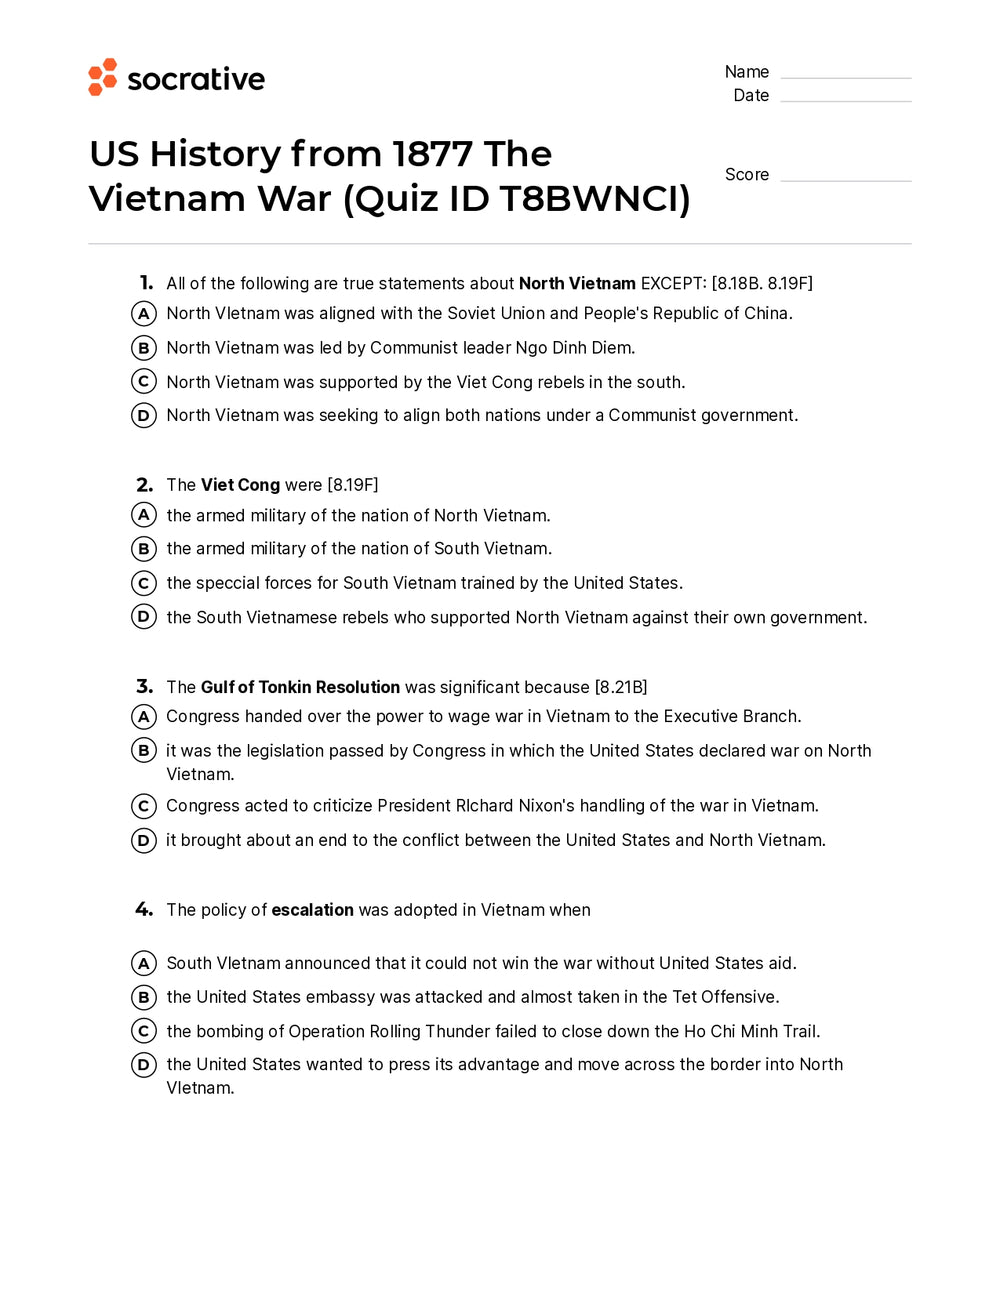 critical thinking questions about the vietnam war